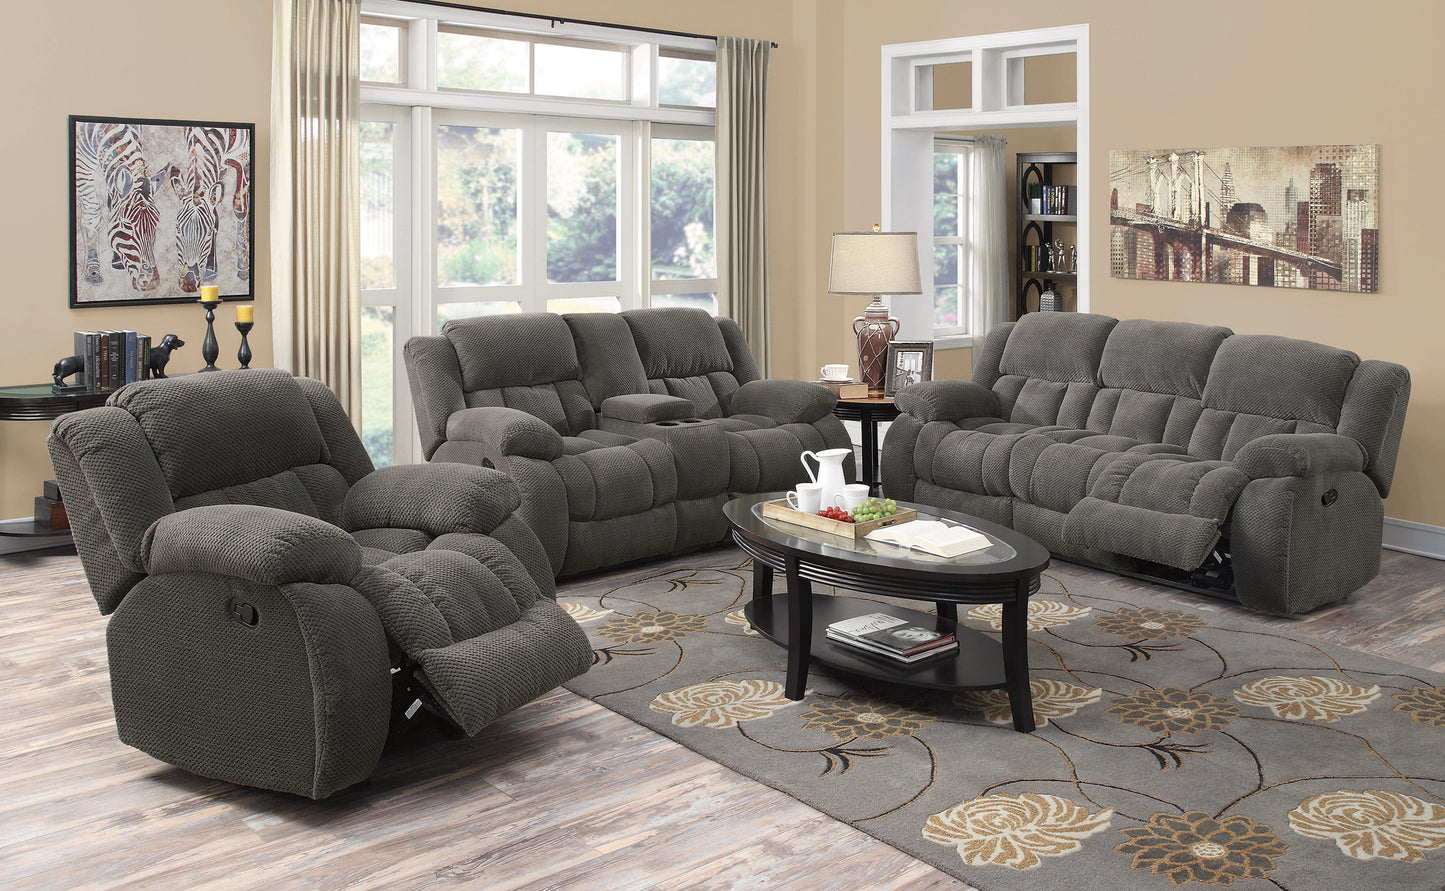 Weissman Motion Loveseat with Console Charcoal